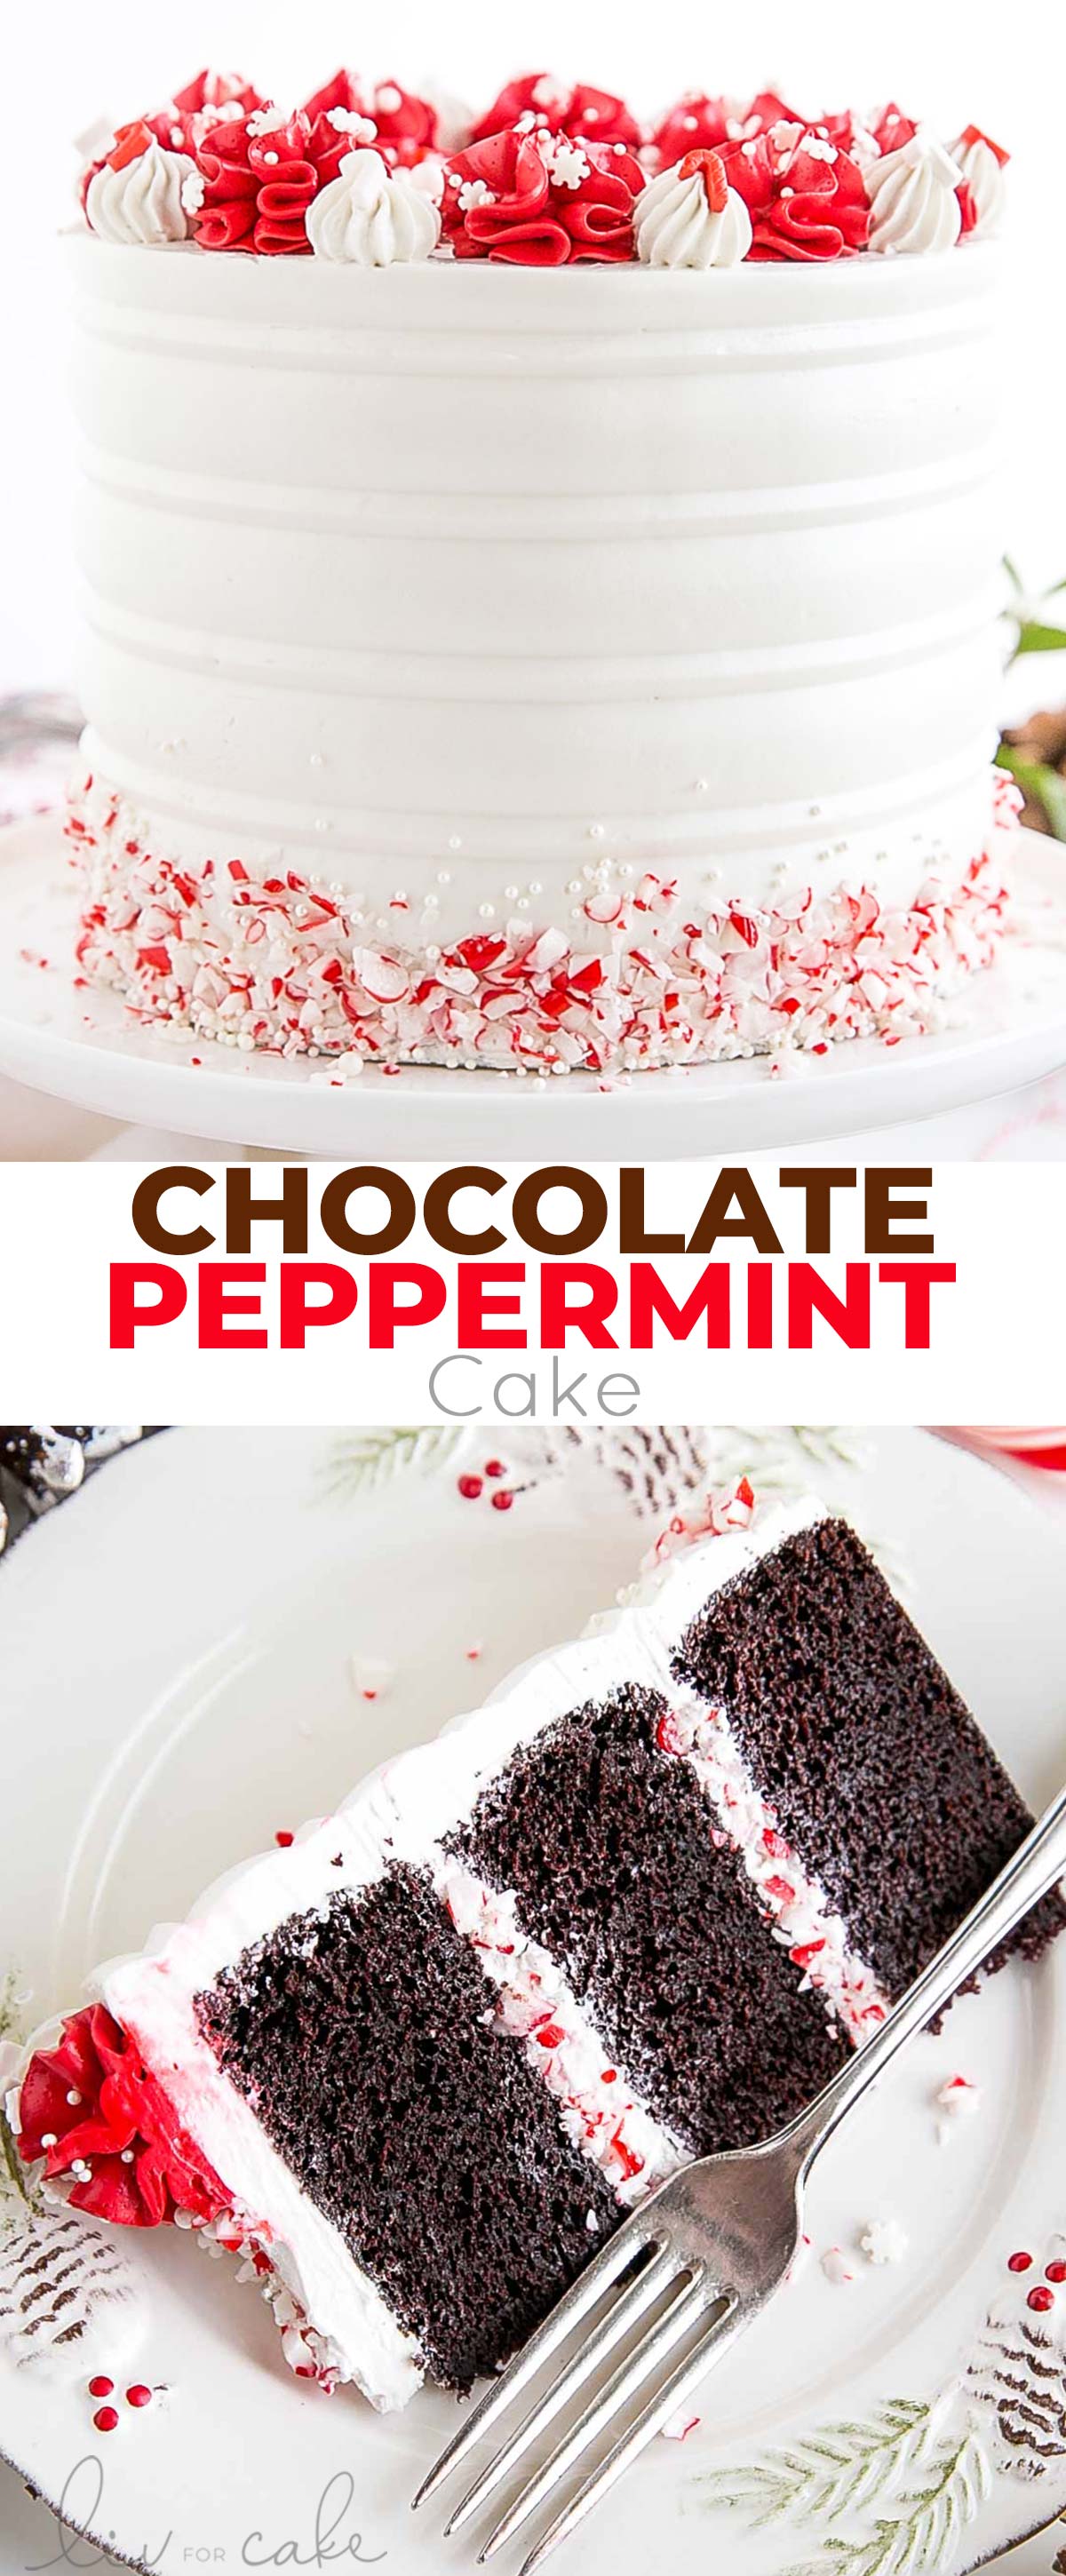 chocolate peppermint cake collage